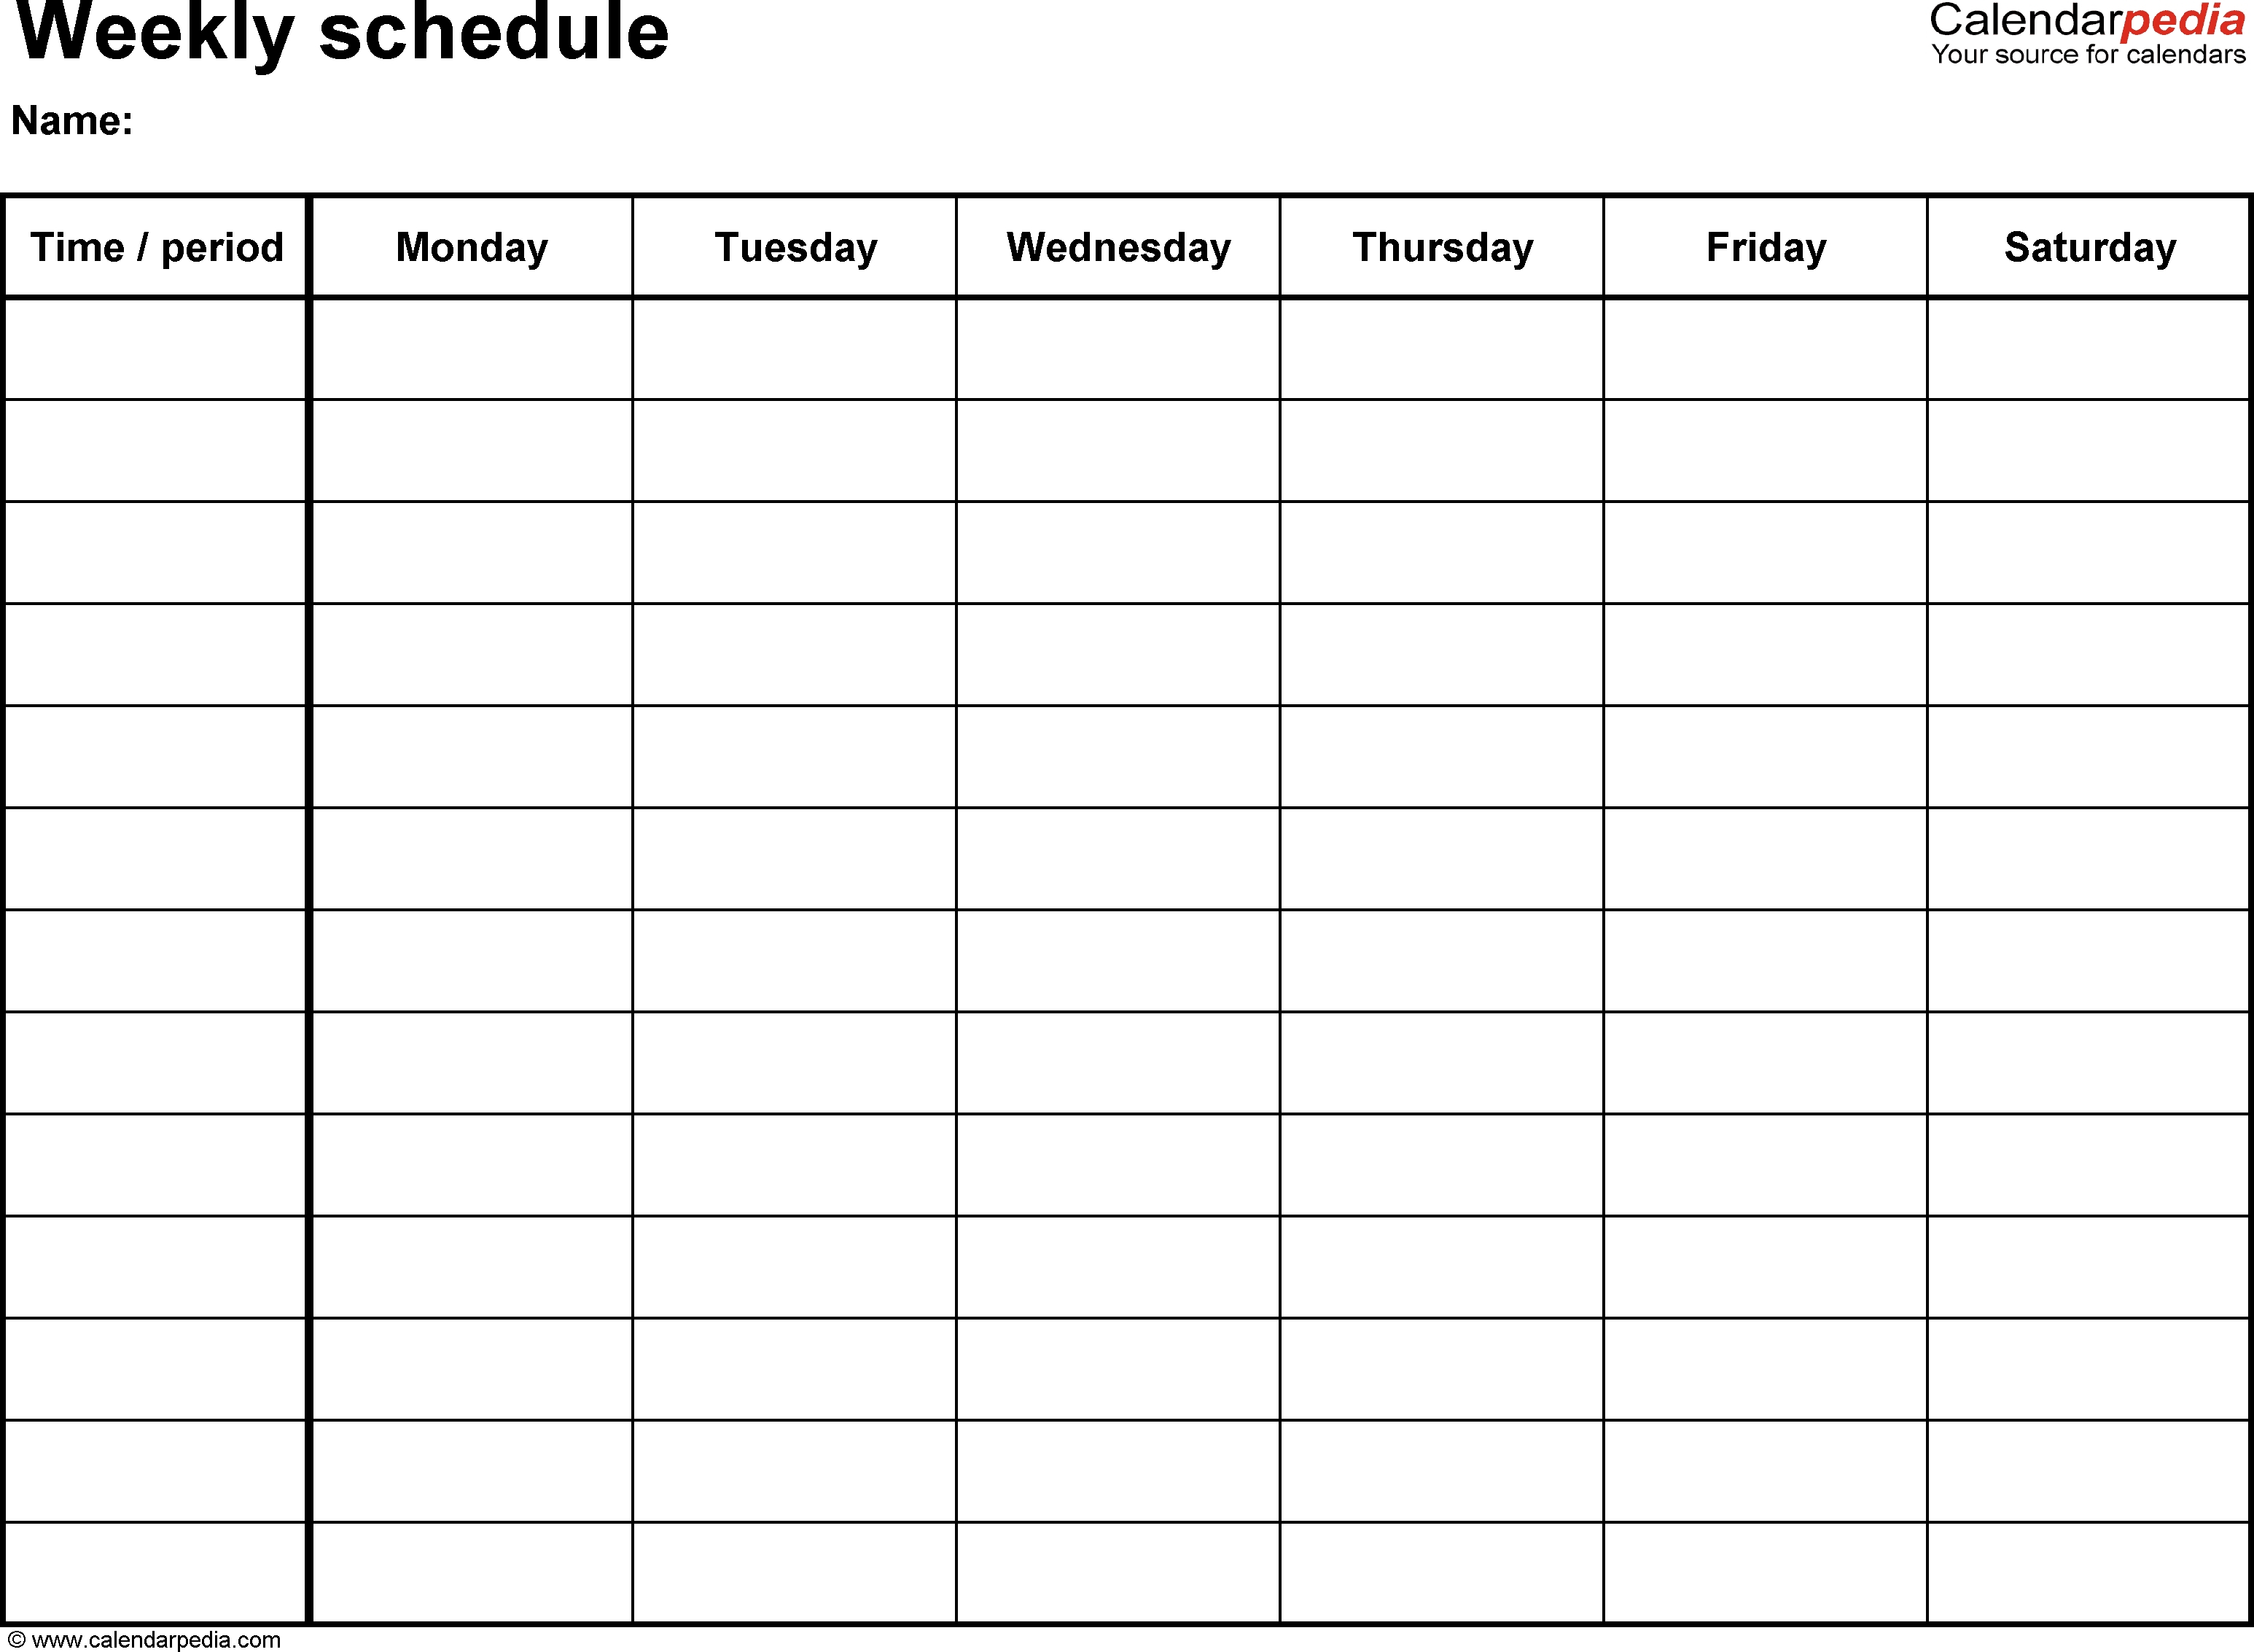 Weekly Schedule Monday Through Friday | Example Calendar pertaining to Free Weekly Schedule